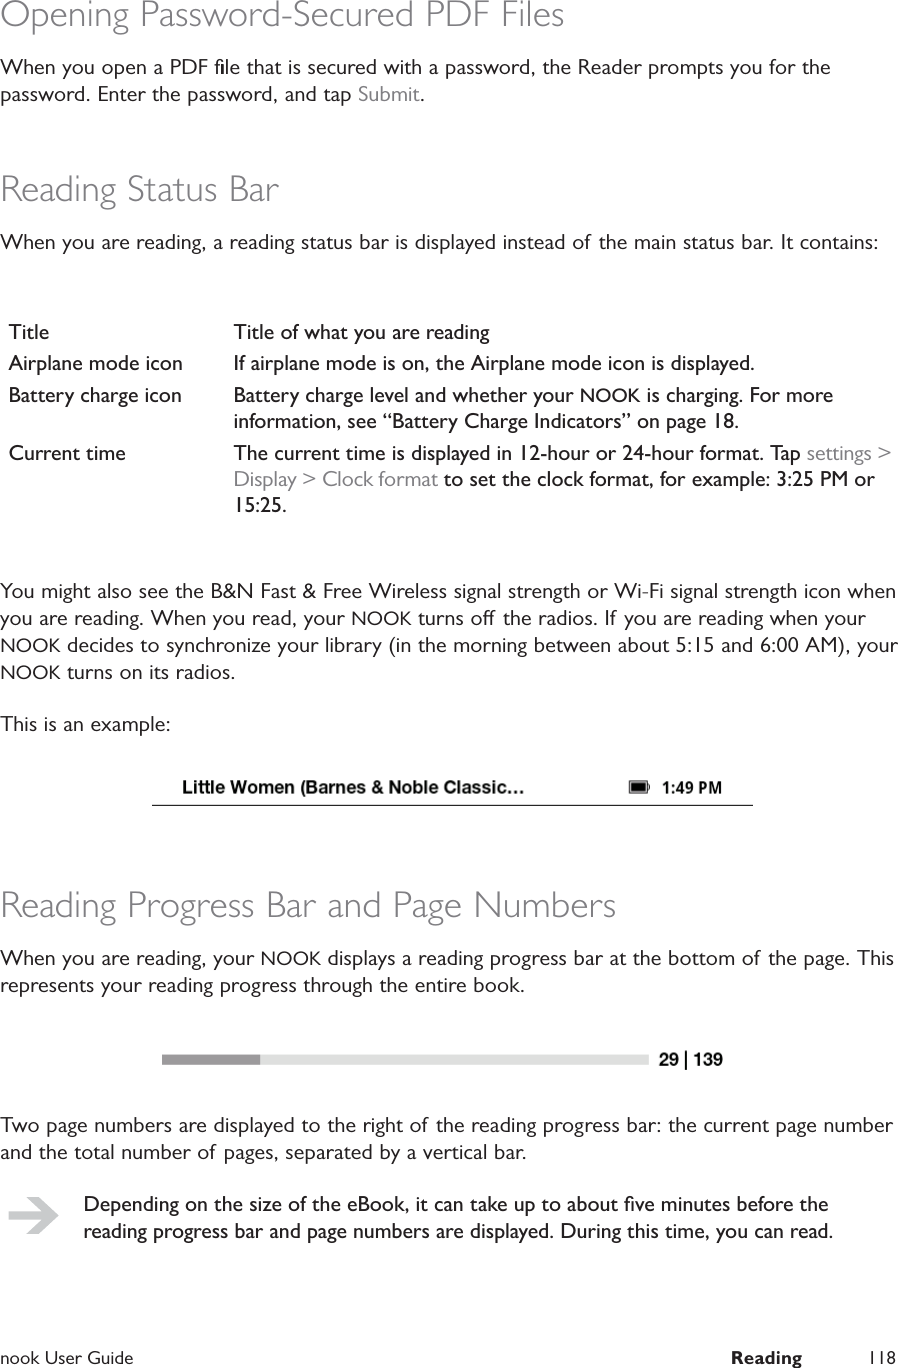  nook User Guide  Reading 118Opening Password-Secured PDF FilesWhen you open a PDF ﬁle that is secured with a password, the Reader prompts you for the password. Enter the password, and tap Submit.Reading Status BarWhen you are reading, a reading status bar is displayed instead of the main status bar. It contains:Title Title of what you are readingAirplane mode icon If airplane mode is on, the Airplane mode icon is displayed.Battery charge icon Battery charge level and whether your NOOK is charging. For more information, see “Battery Charge Indicators” on page 18.Current time The current time is displayed in 12-hour or 24-hour format. Tap settings &gt; Display &gt; Clock format to set the clock format, for example: 3:25 PM or 15:25.You might also see the B&amp;N Fast &amp; Free Wireless signal strength or Wi-Fi signal strength icon when you are reading. When you read, your NOOK turns o the radios. If you are reading when your NOOK decides to synchronize your library (in the morning between about 5:15 and 6:00 AM), your NOOK turns on its radios.This is an example:Reading Progress Bar and Page NumbersWhen you are reading, your NOOK displays a reading progress bar at the bottom of the page. This represents your reading progress through the entire book.Two page numbers are displayed to the right of the reading progress bar: the current page number and the total number of pages, separated by a vertical bar.Depending on the size of the eBook, it can take up to about ﬁve minutes before the reading progress bar and page numbers are displayed. During this time, you can read.